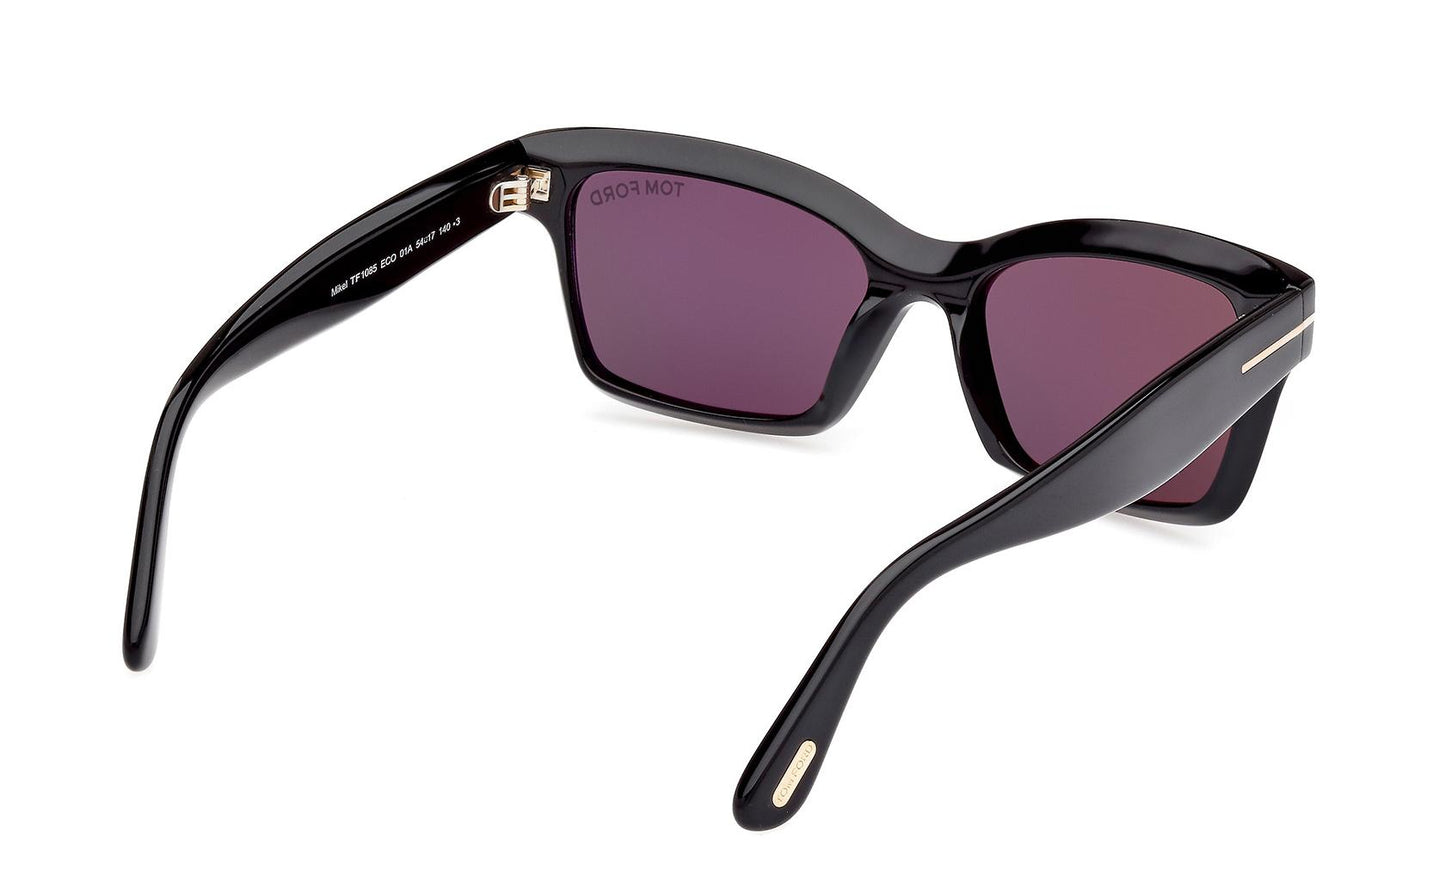 Tom Ford Mikel Sunglasses FT1085 01A